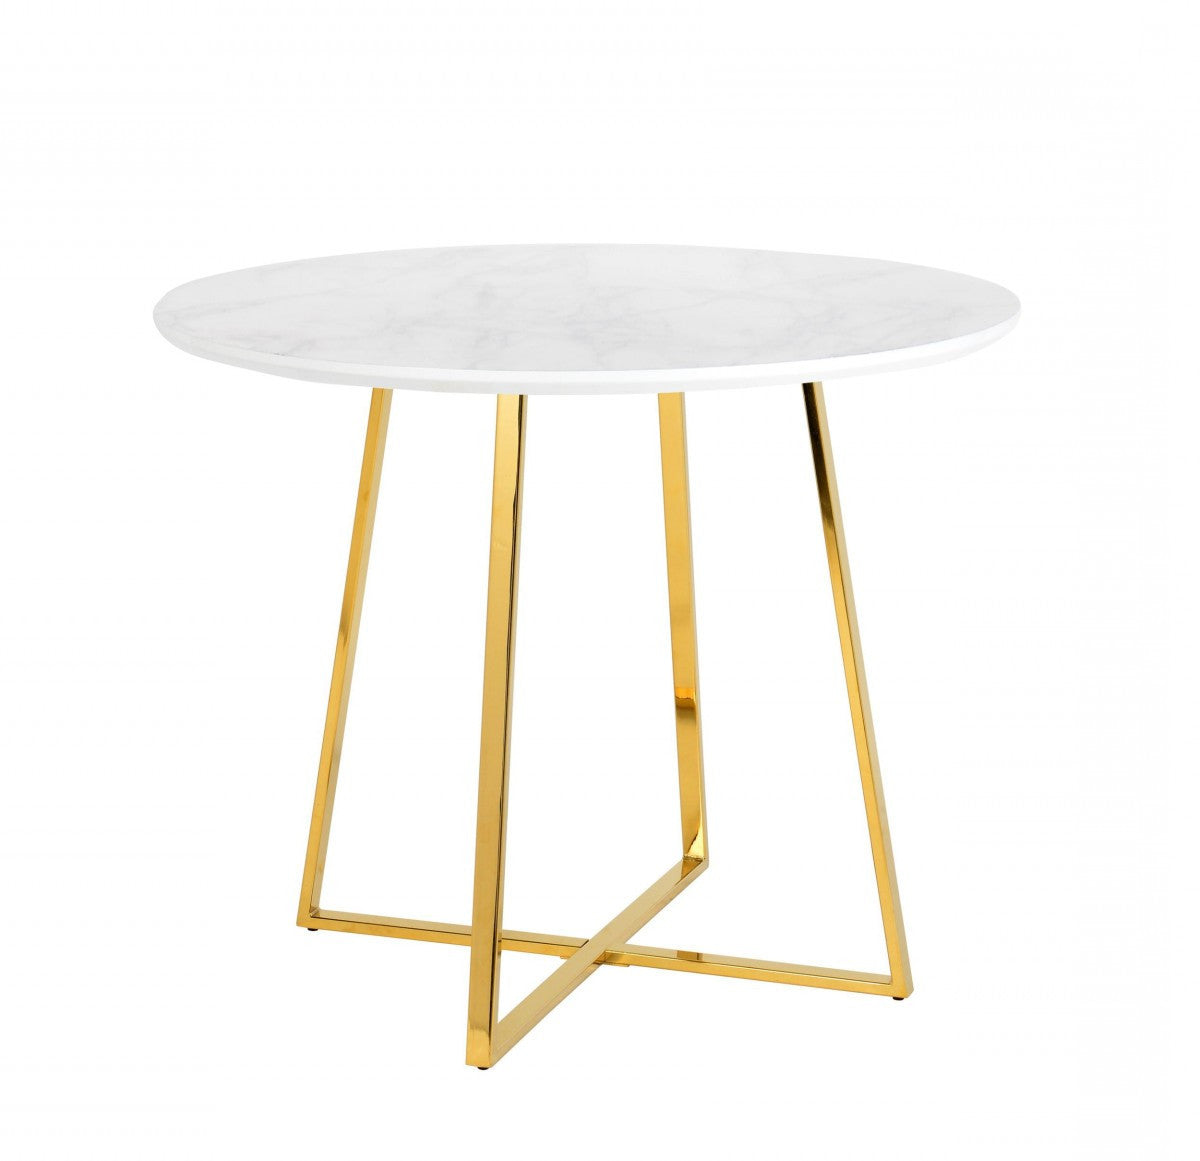 39" White Faux Marble and Gold Round Dining Table